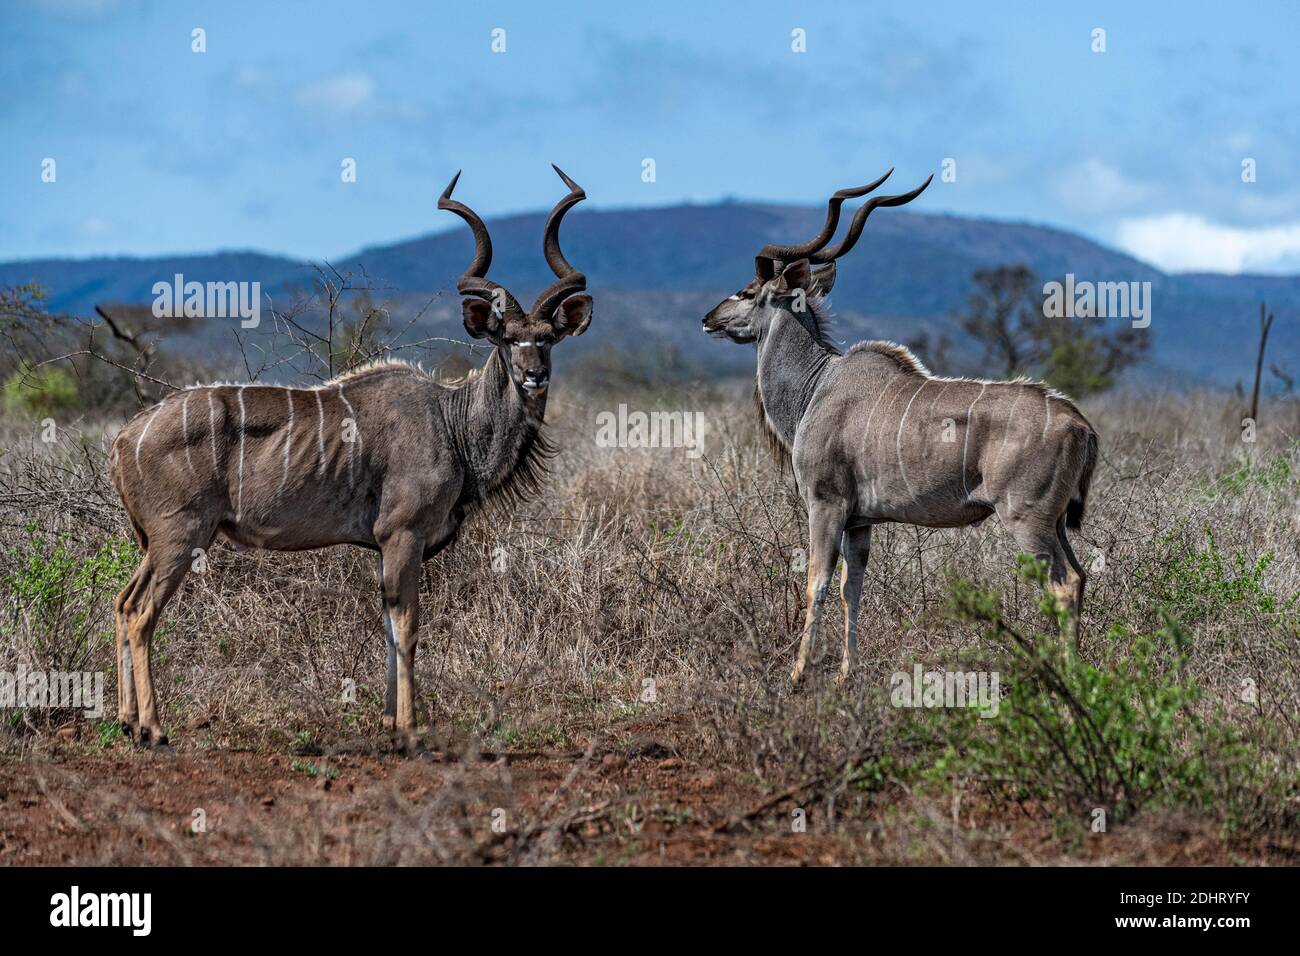 Two males greater kudu (Tragelaphus strepsiceros) in Zimanga Private Reserve, South Africa. Stock Photo